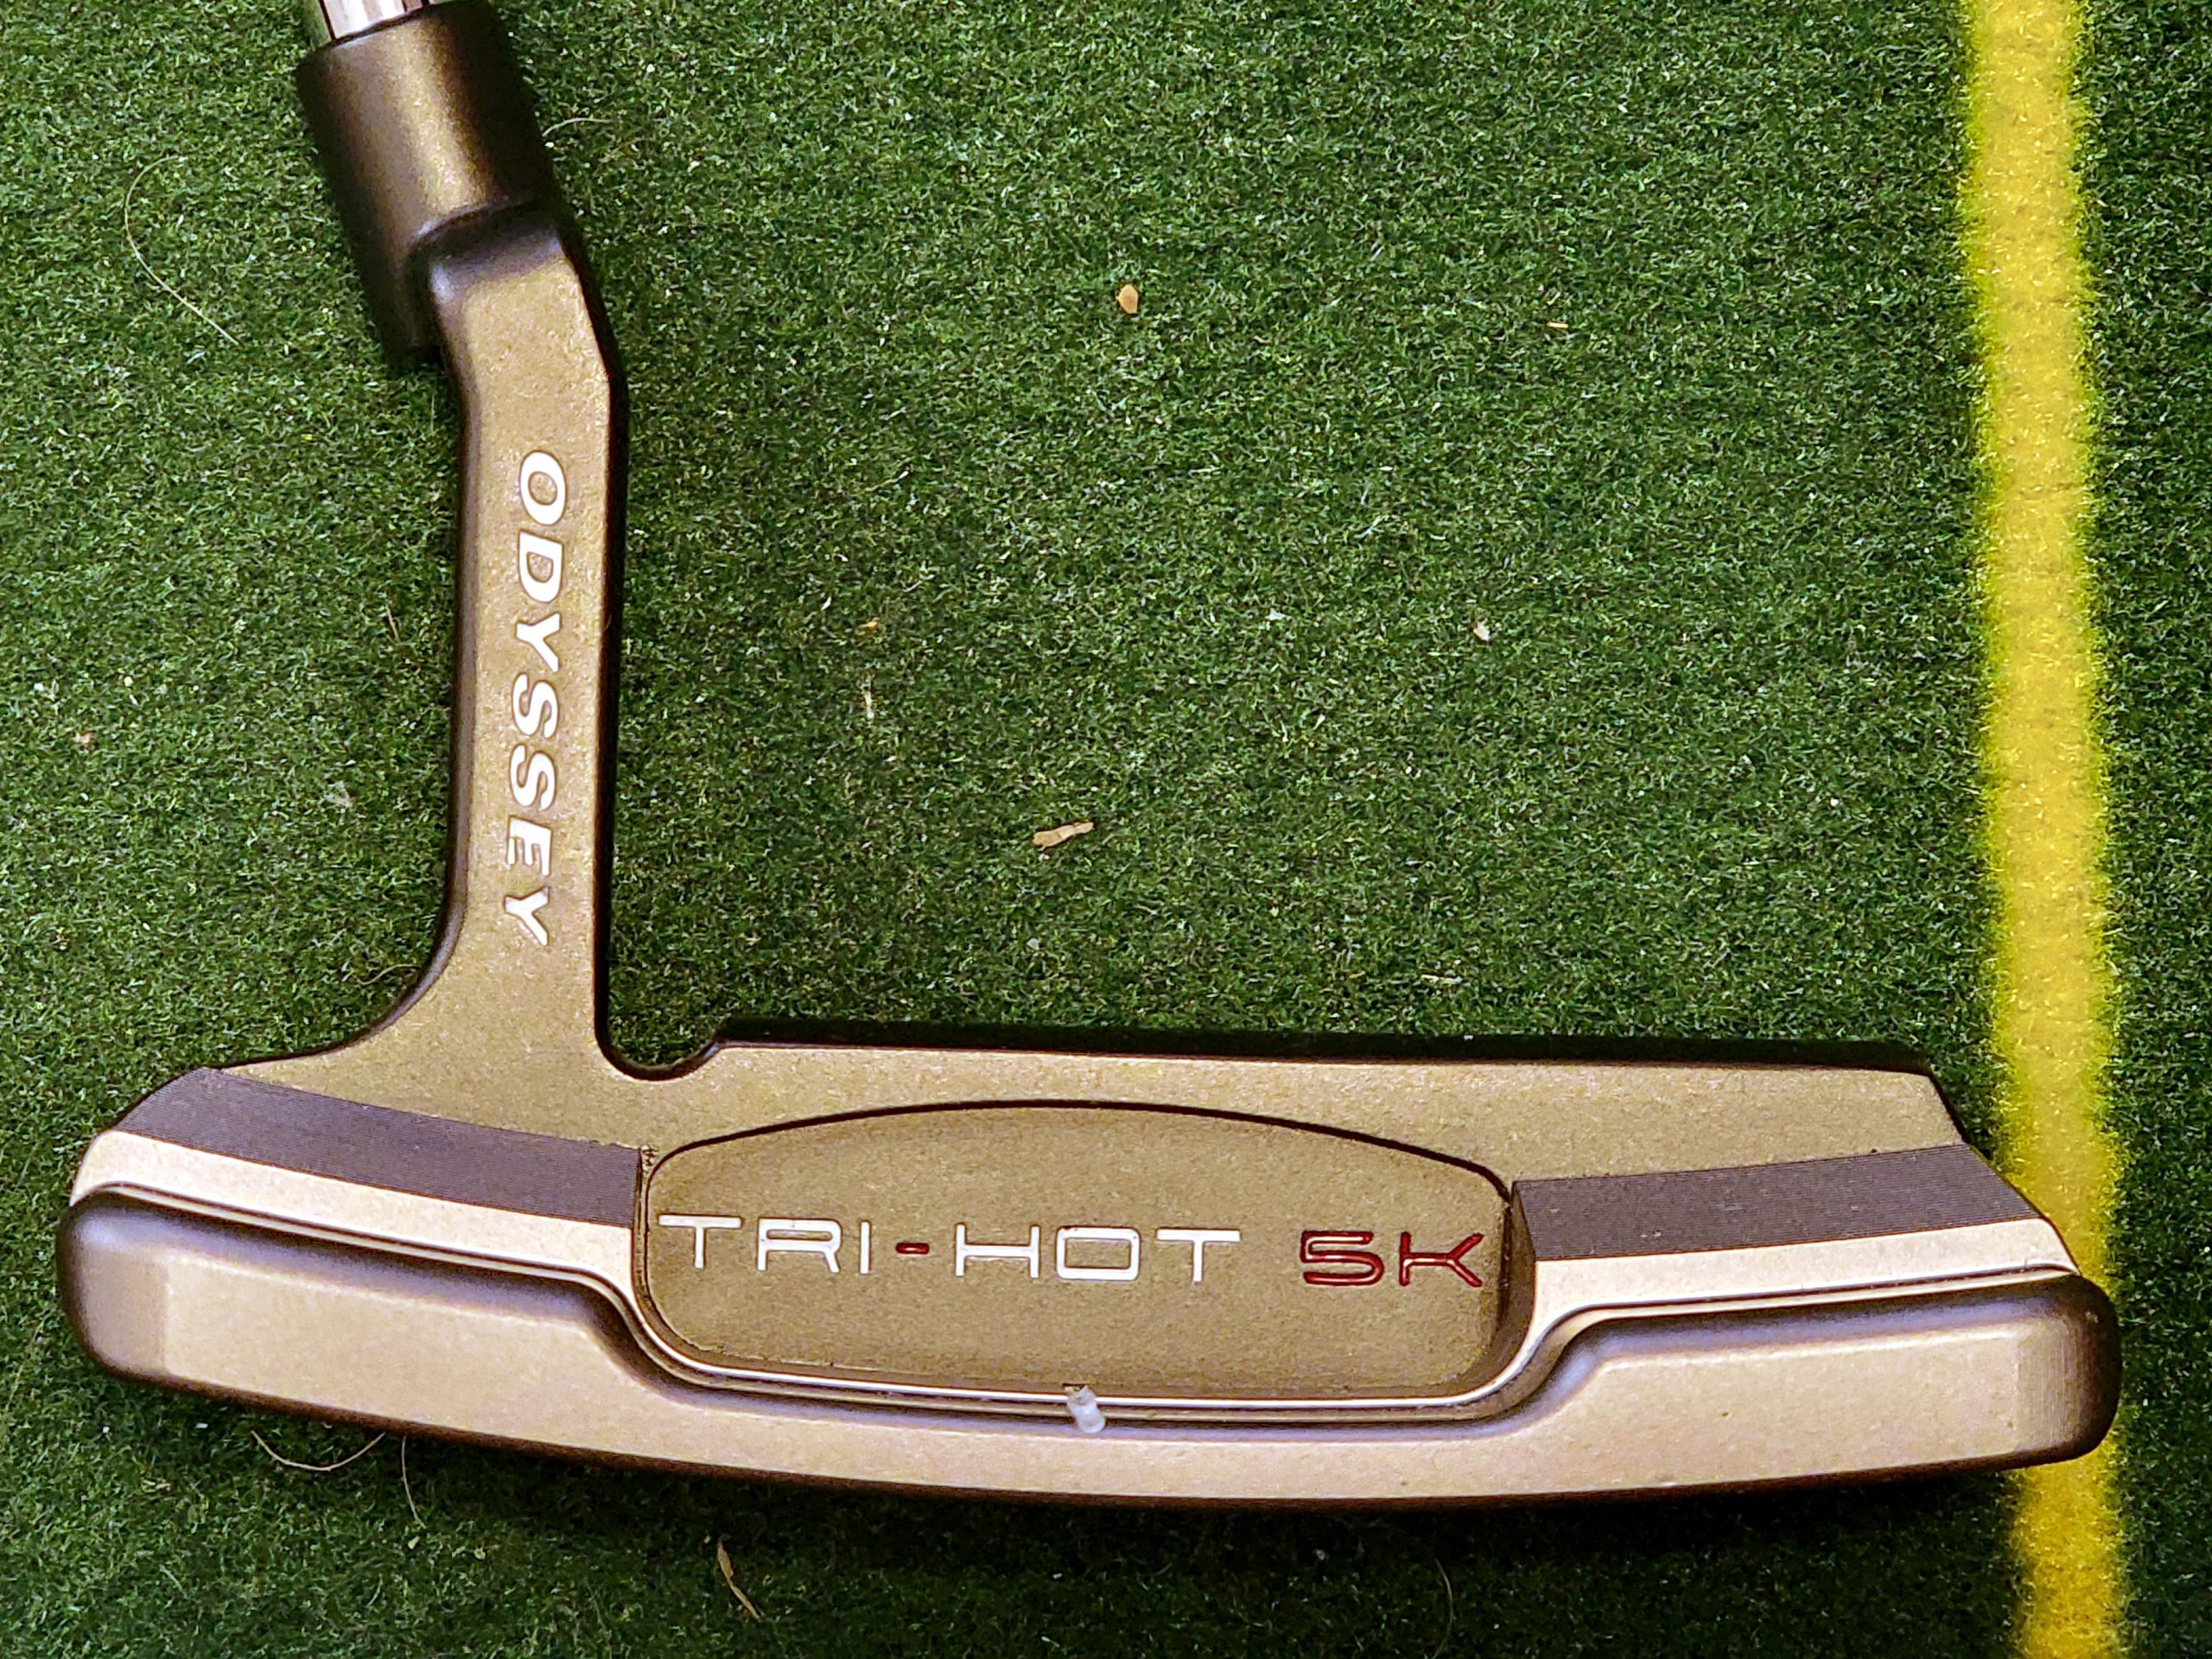 Old Duffer Golf image of a new putter back view